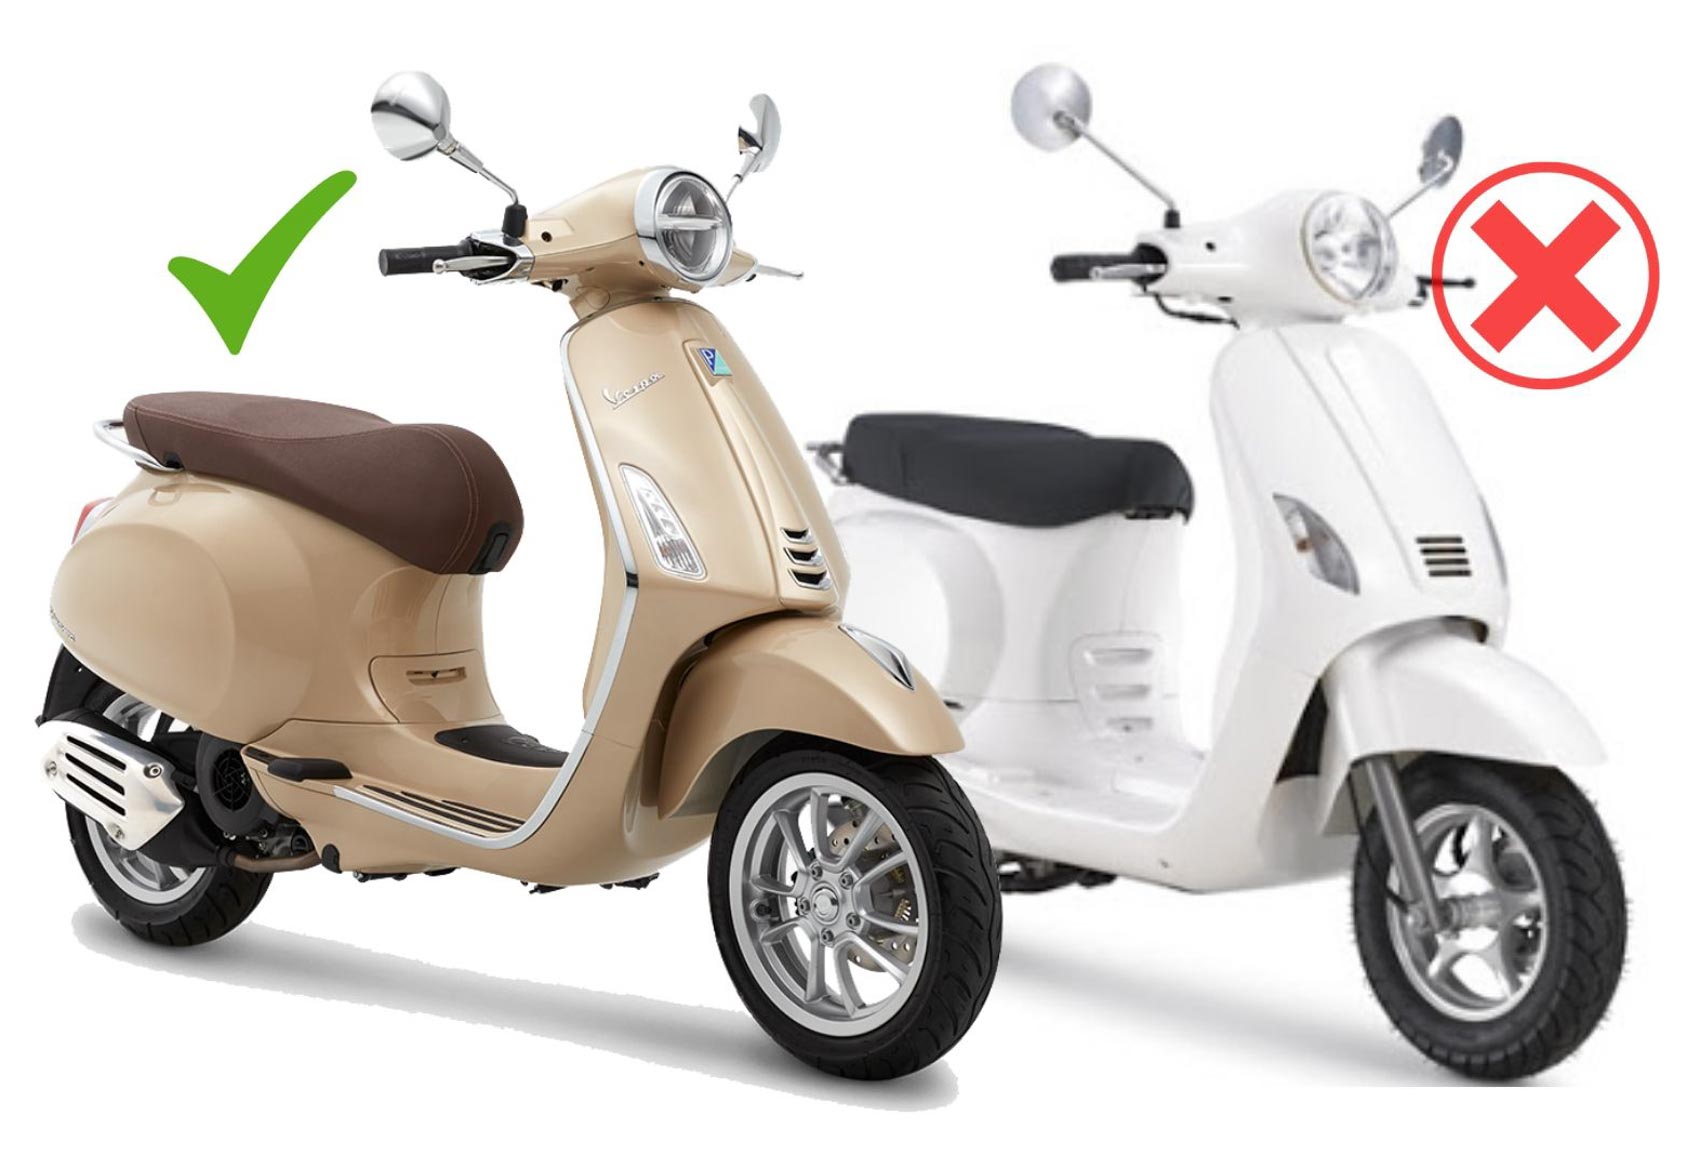 This Chinese Scooter Is A Hilarious Copycat Version Of Vespa ZX 125